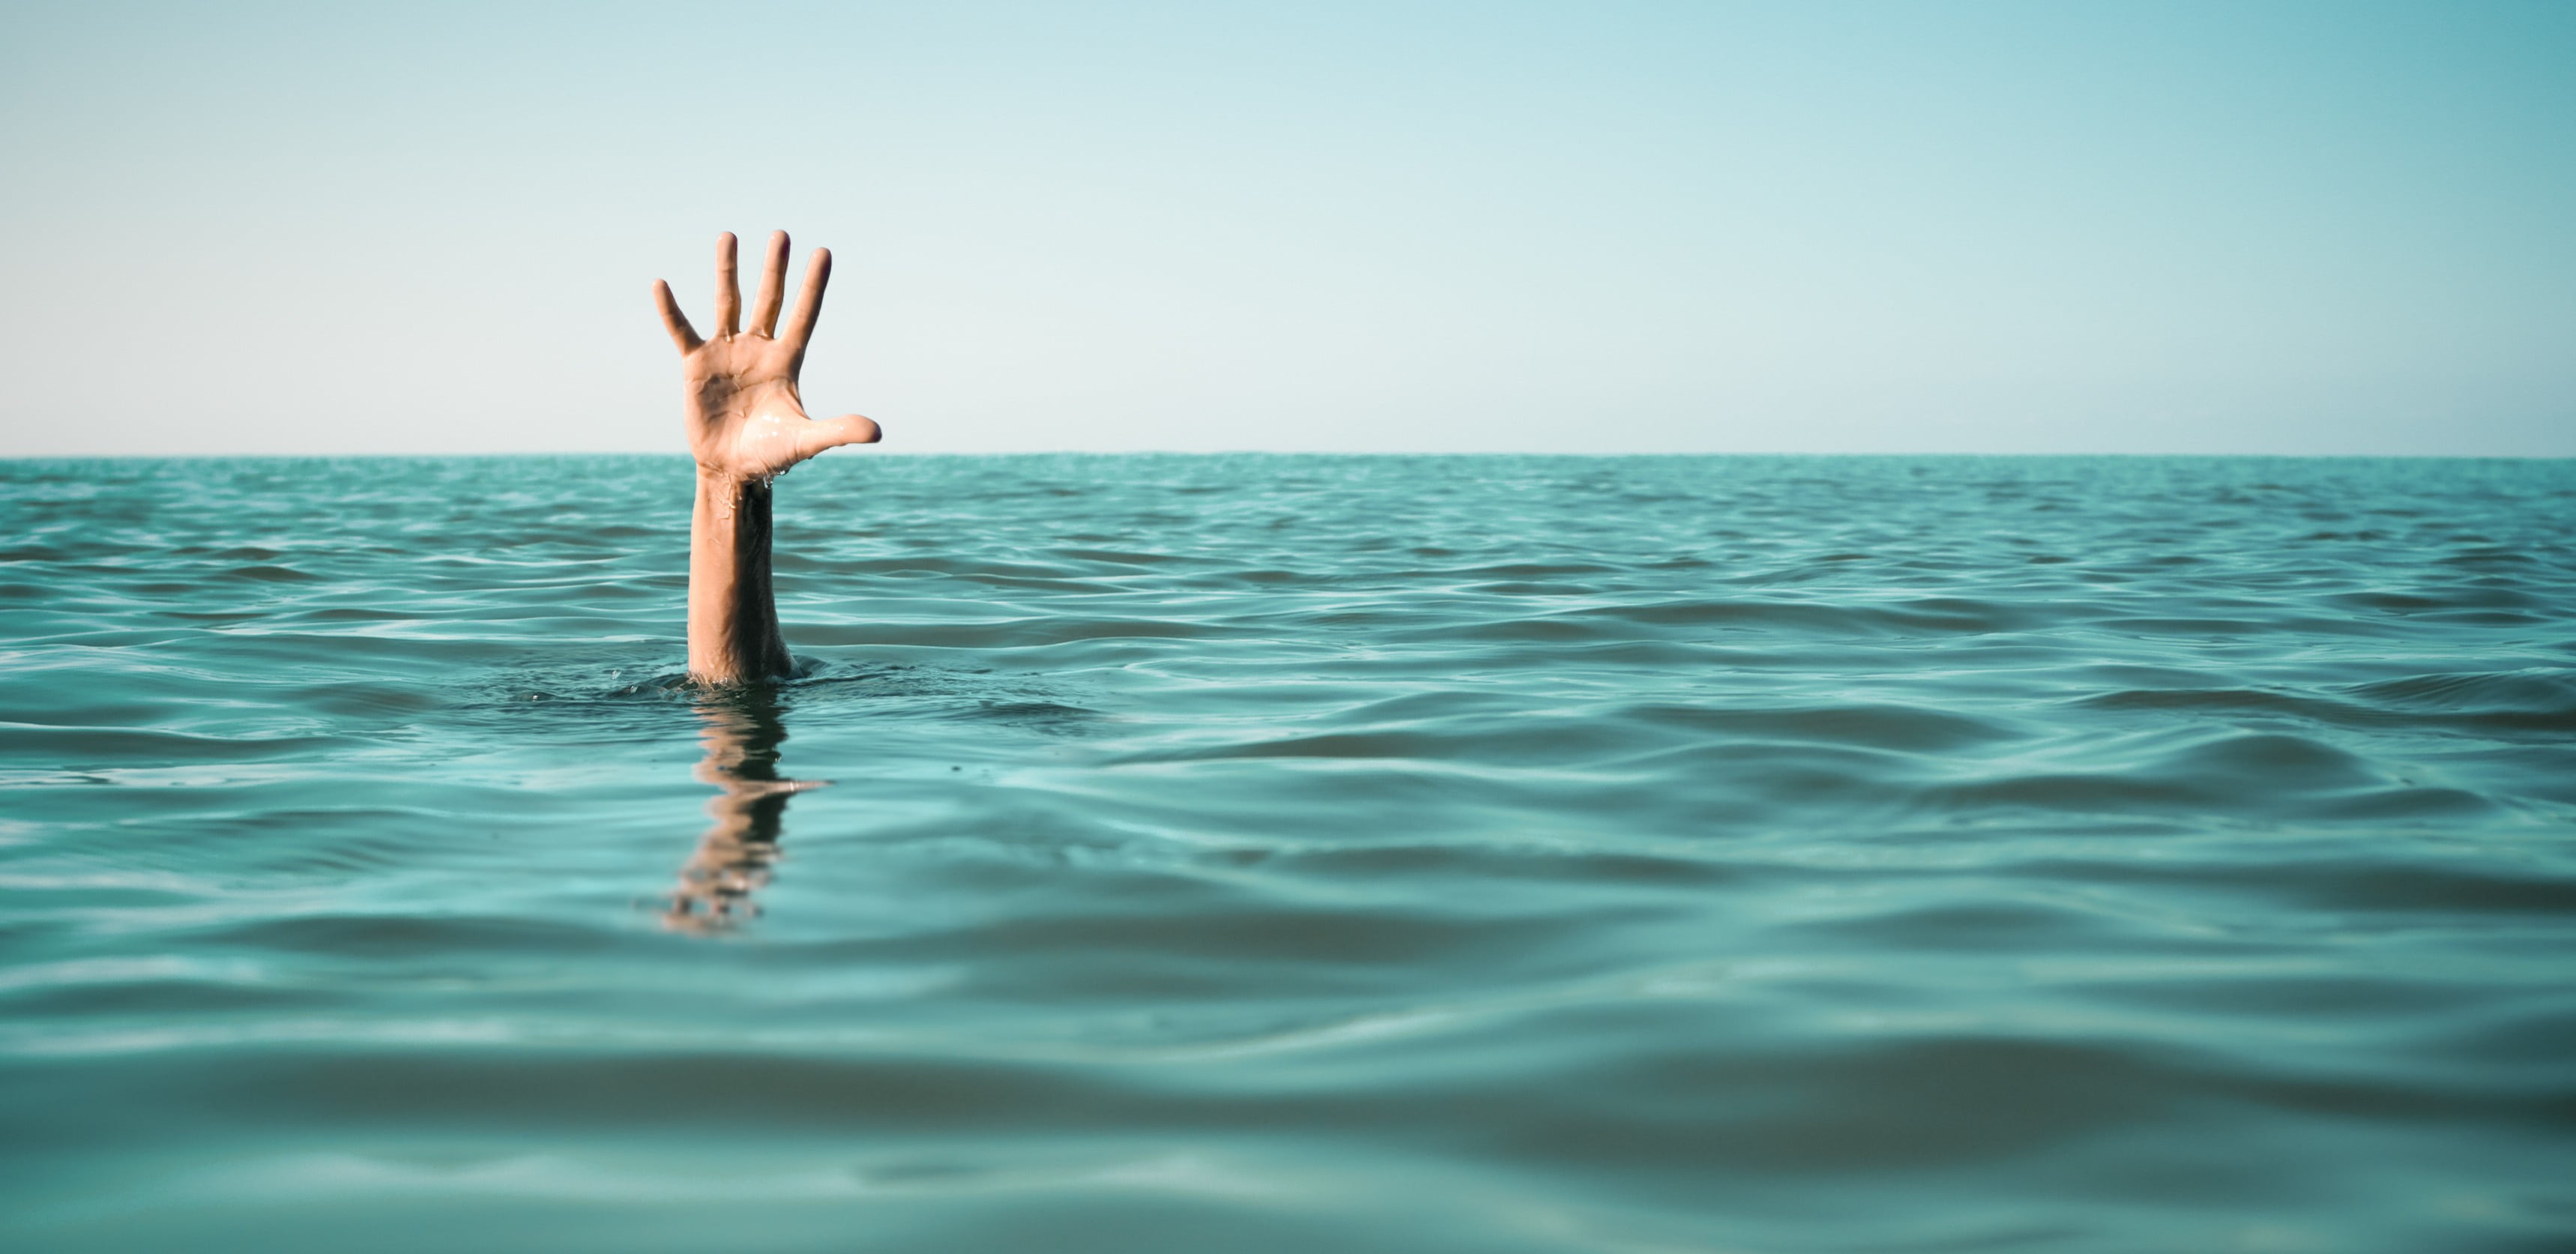 right human hand, drown, sea, hands, water